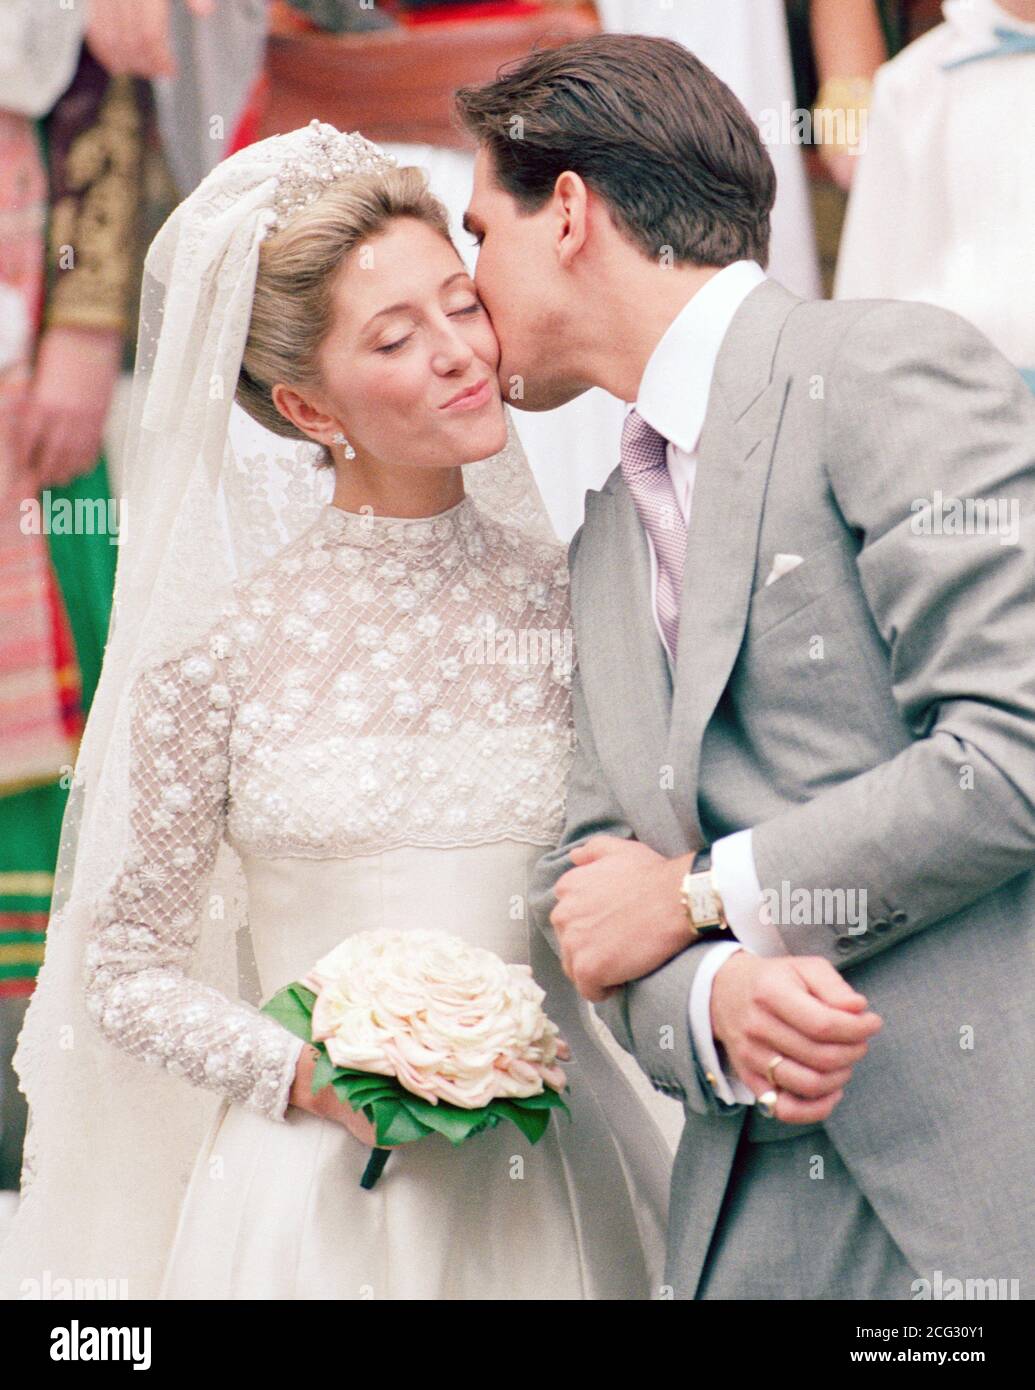 The exiled Crown Prince Pavlos of Greece kisses his bride Marie-Chantal Miller after their wedding at the Greek Orthadox Cathedral of St Sophia in Bayswater, London.   * Royalty from all over the world including 12 senior members of the British royal family, attended the no-expense spared ceremony. Stock Photo